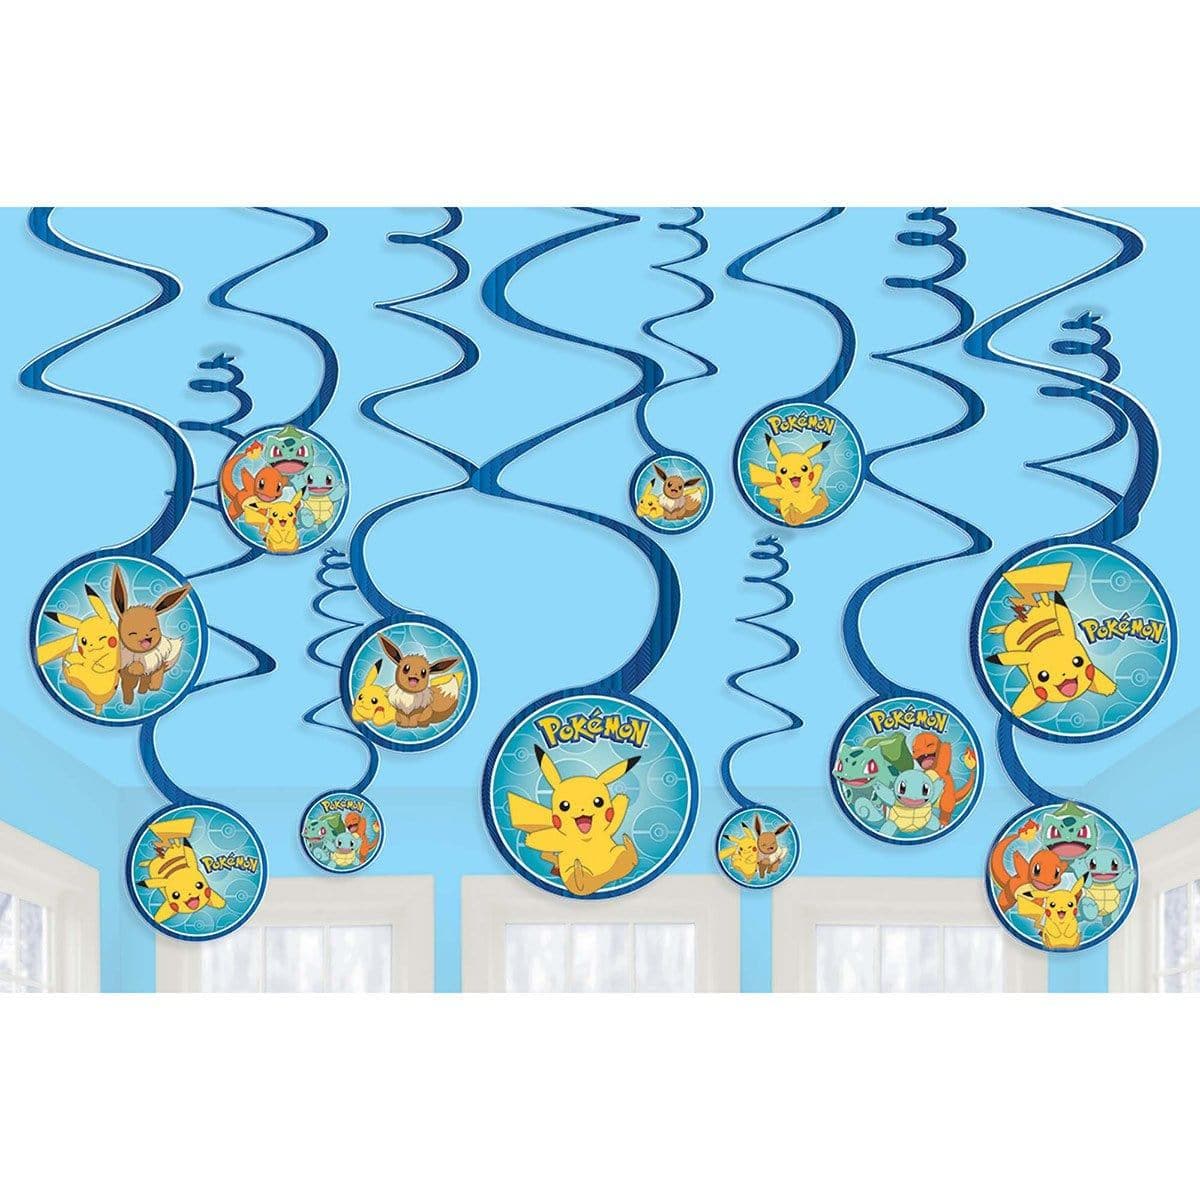 Buy Kids Birthday Pokémon swirl decorations, 12 per package sold at Party Expert